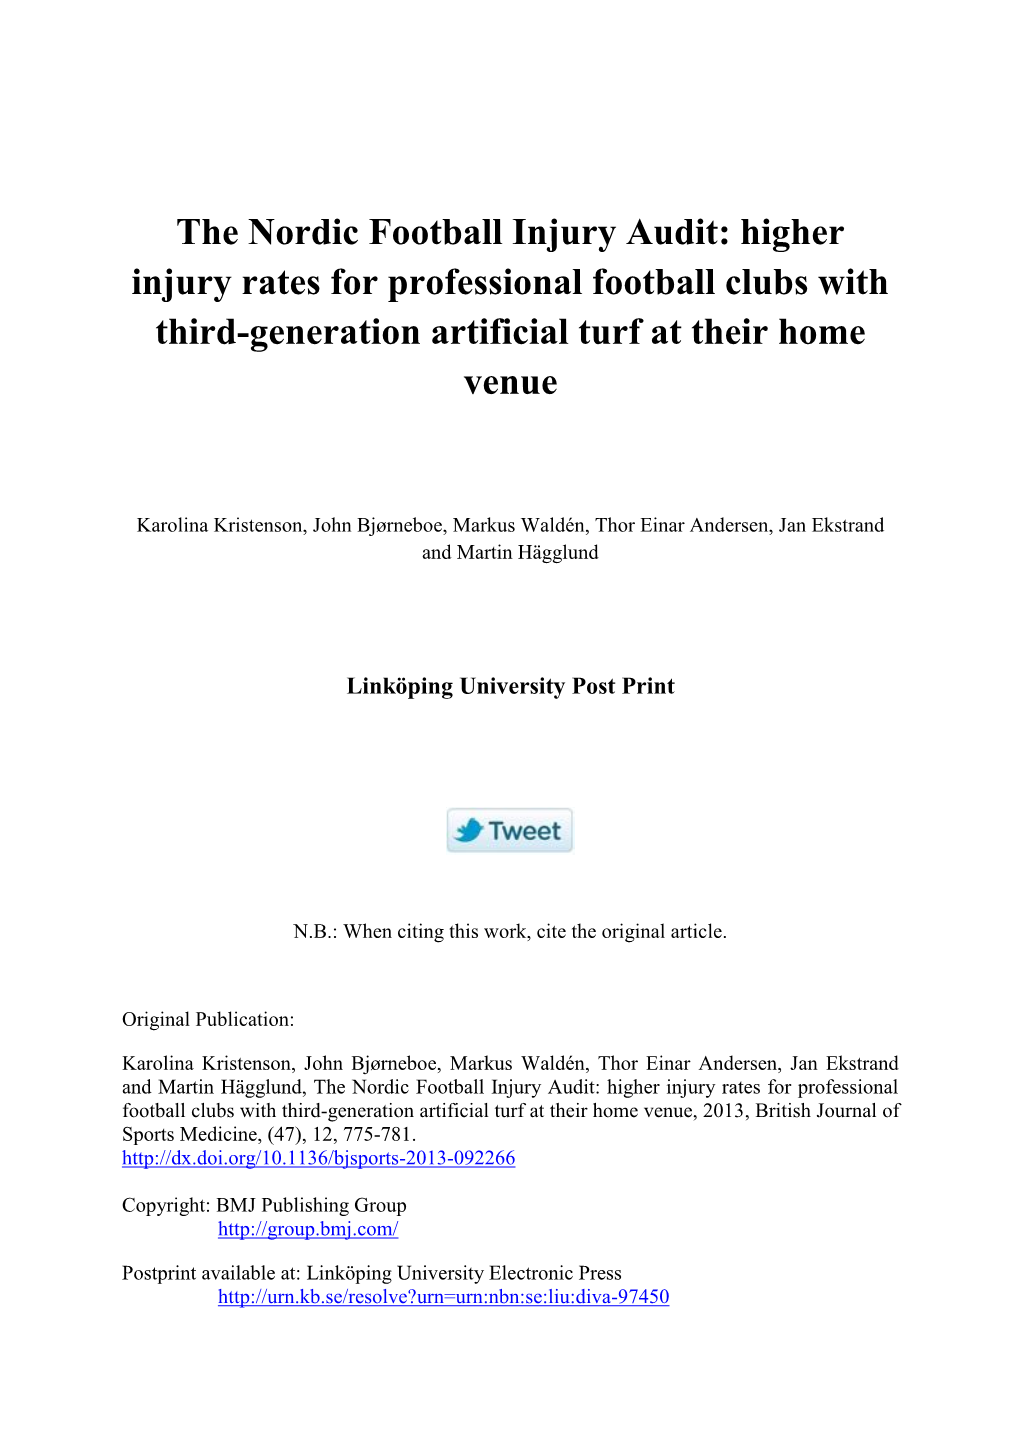 The Nordic Football Injury Audit: Higher Injury Rates for Professional Football Clubs with Third-Generation Artificial Turf at Their Home Venue